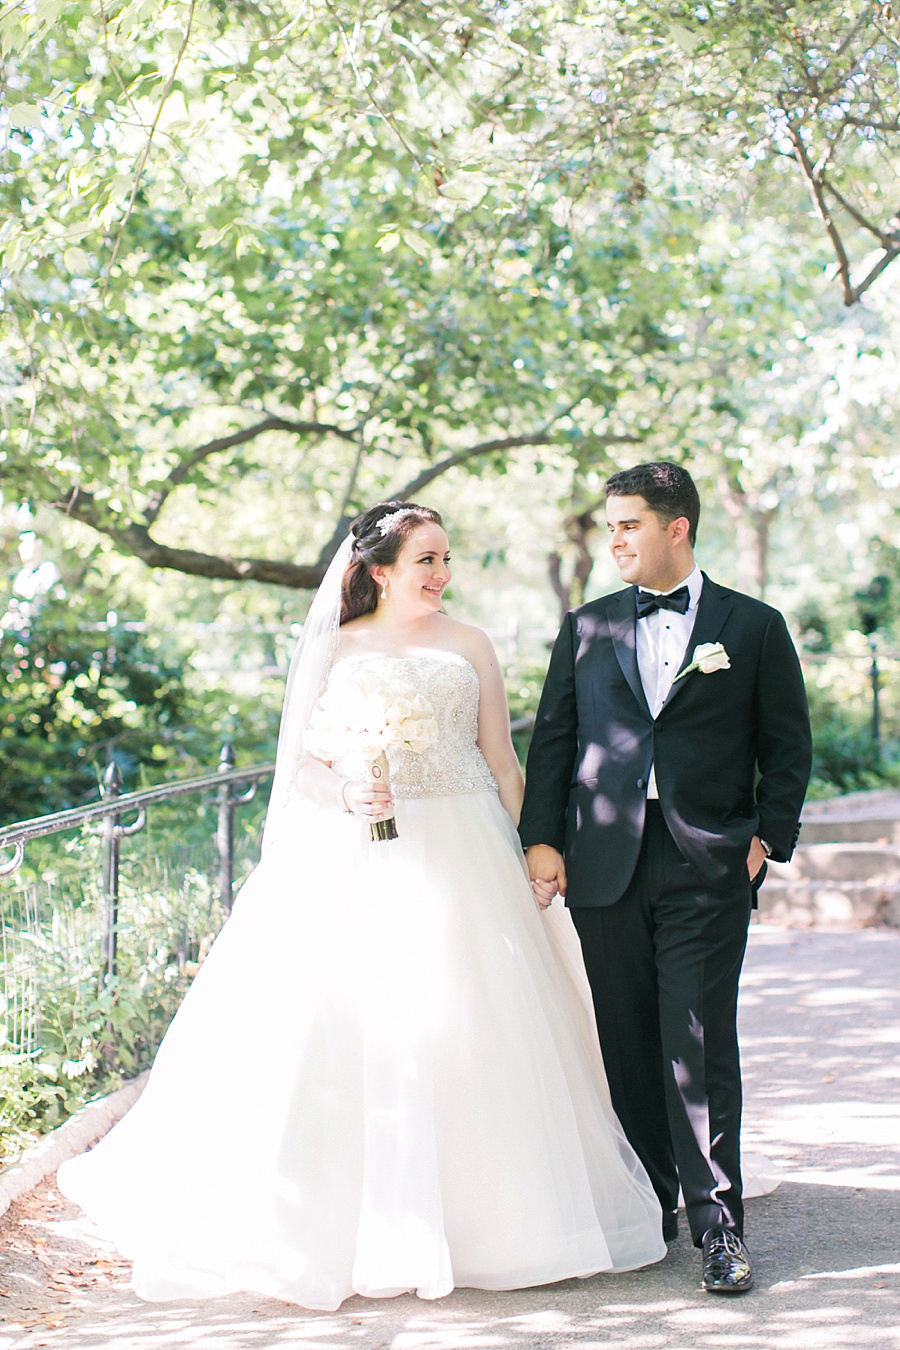 Essex House Wedding Photos - Amy Rizzuto Photography-39